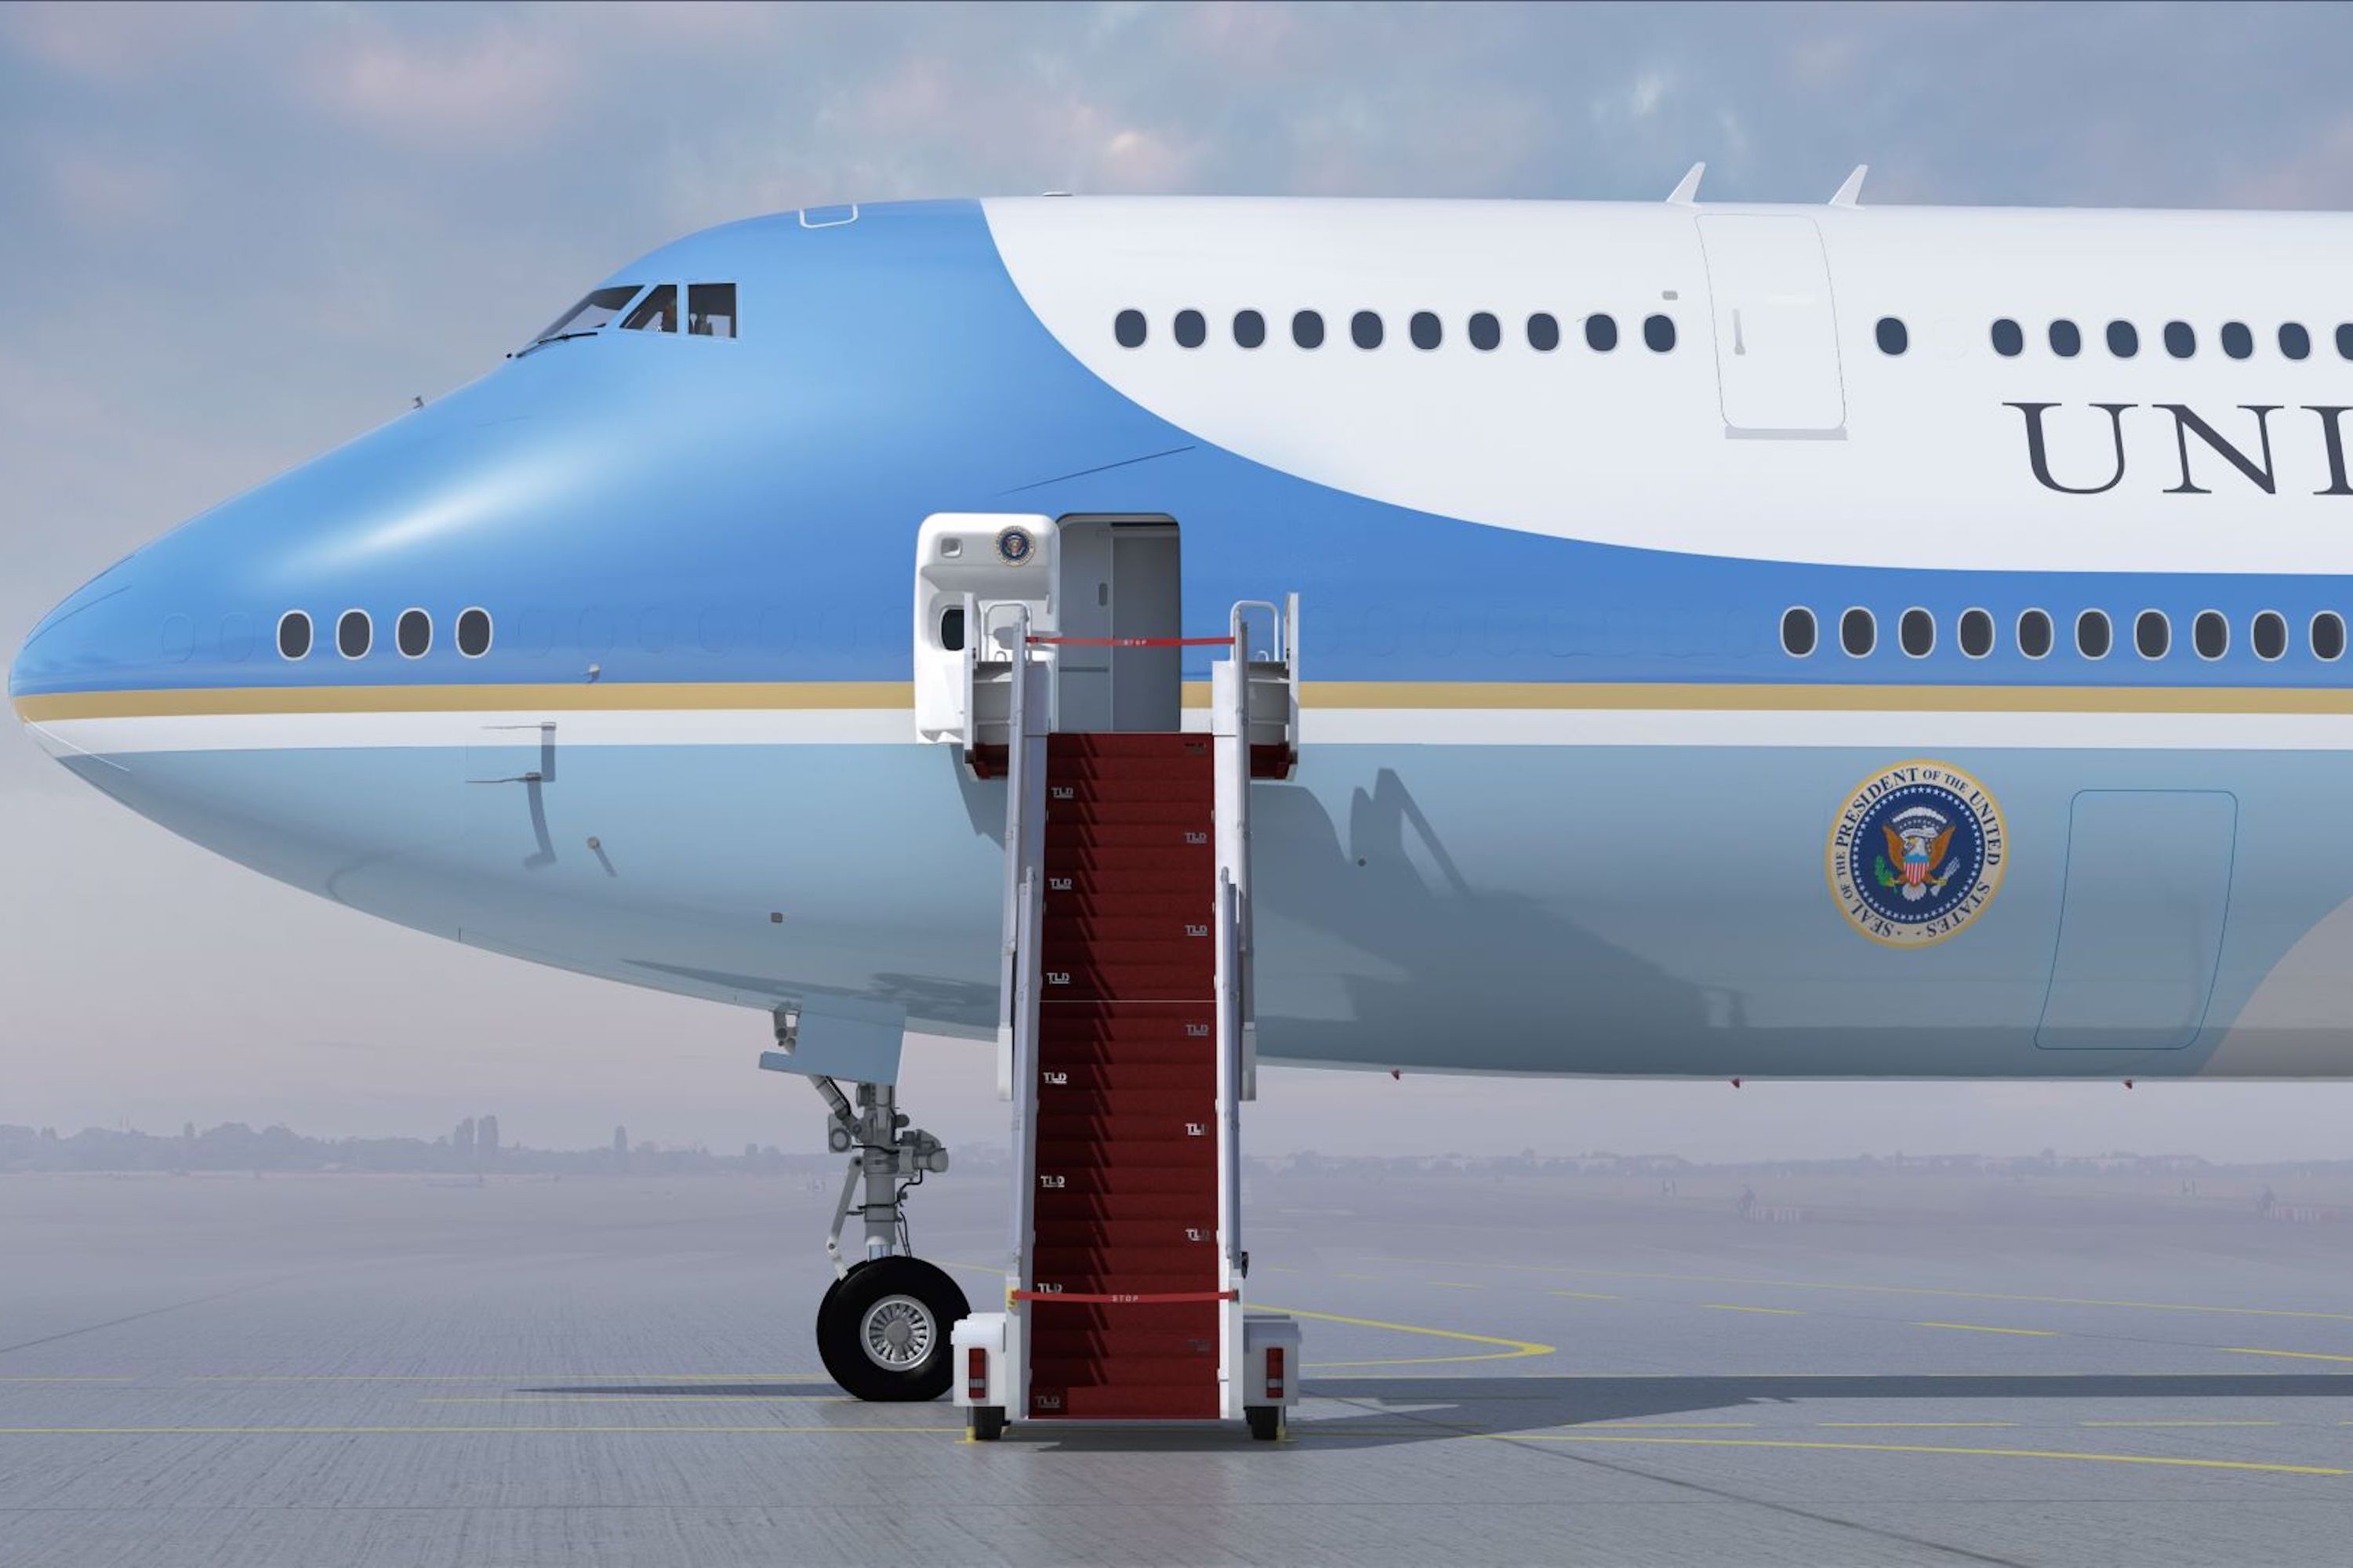 A closeup render of the new Air Force One VC-25B.